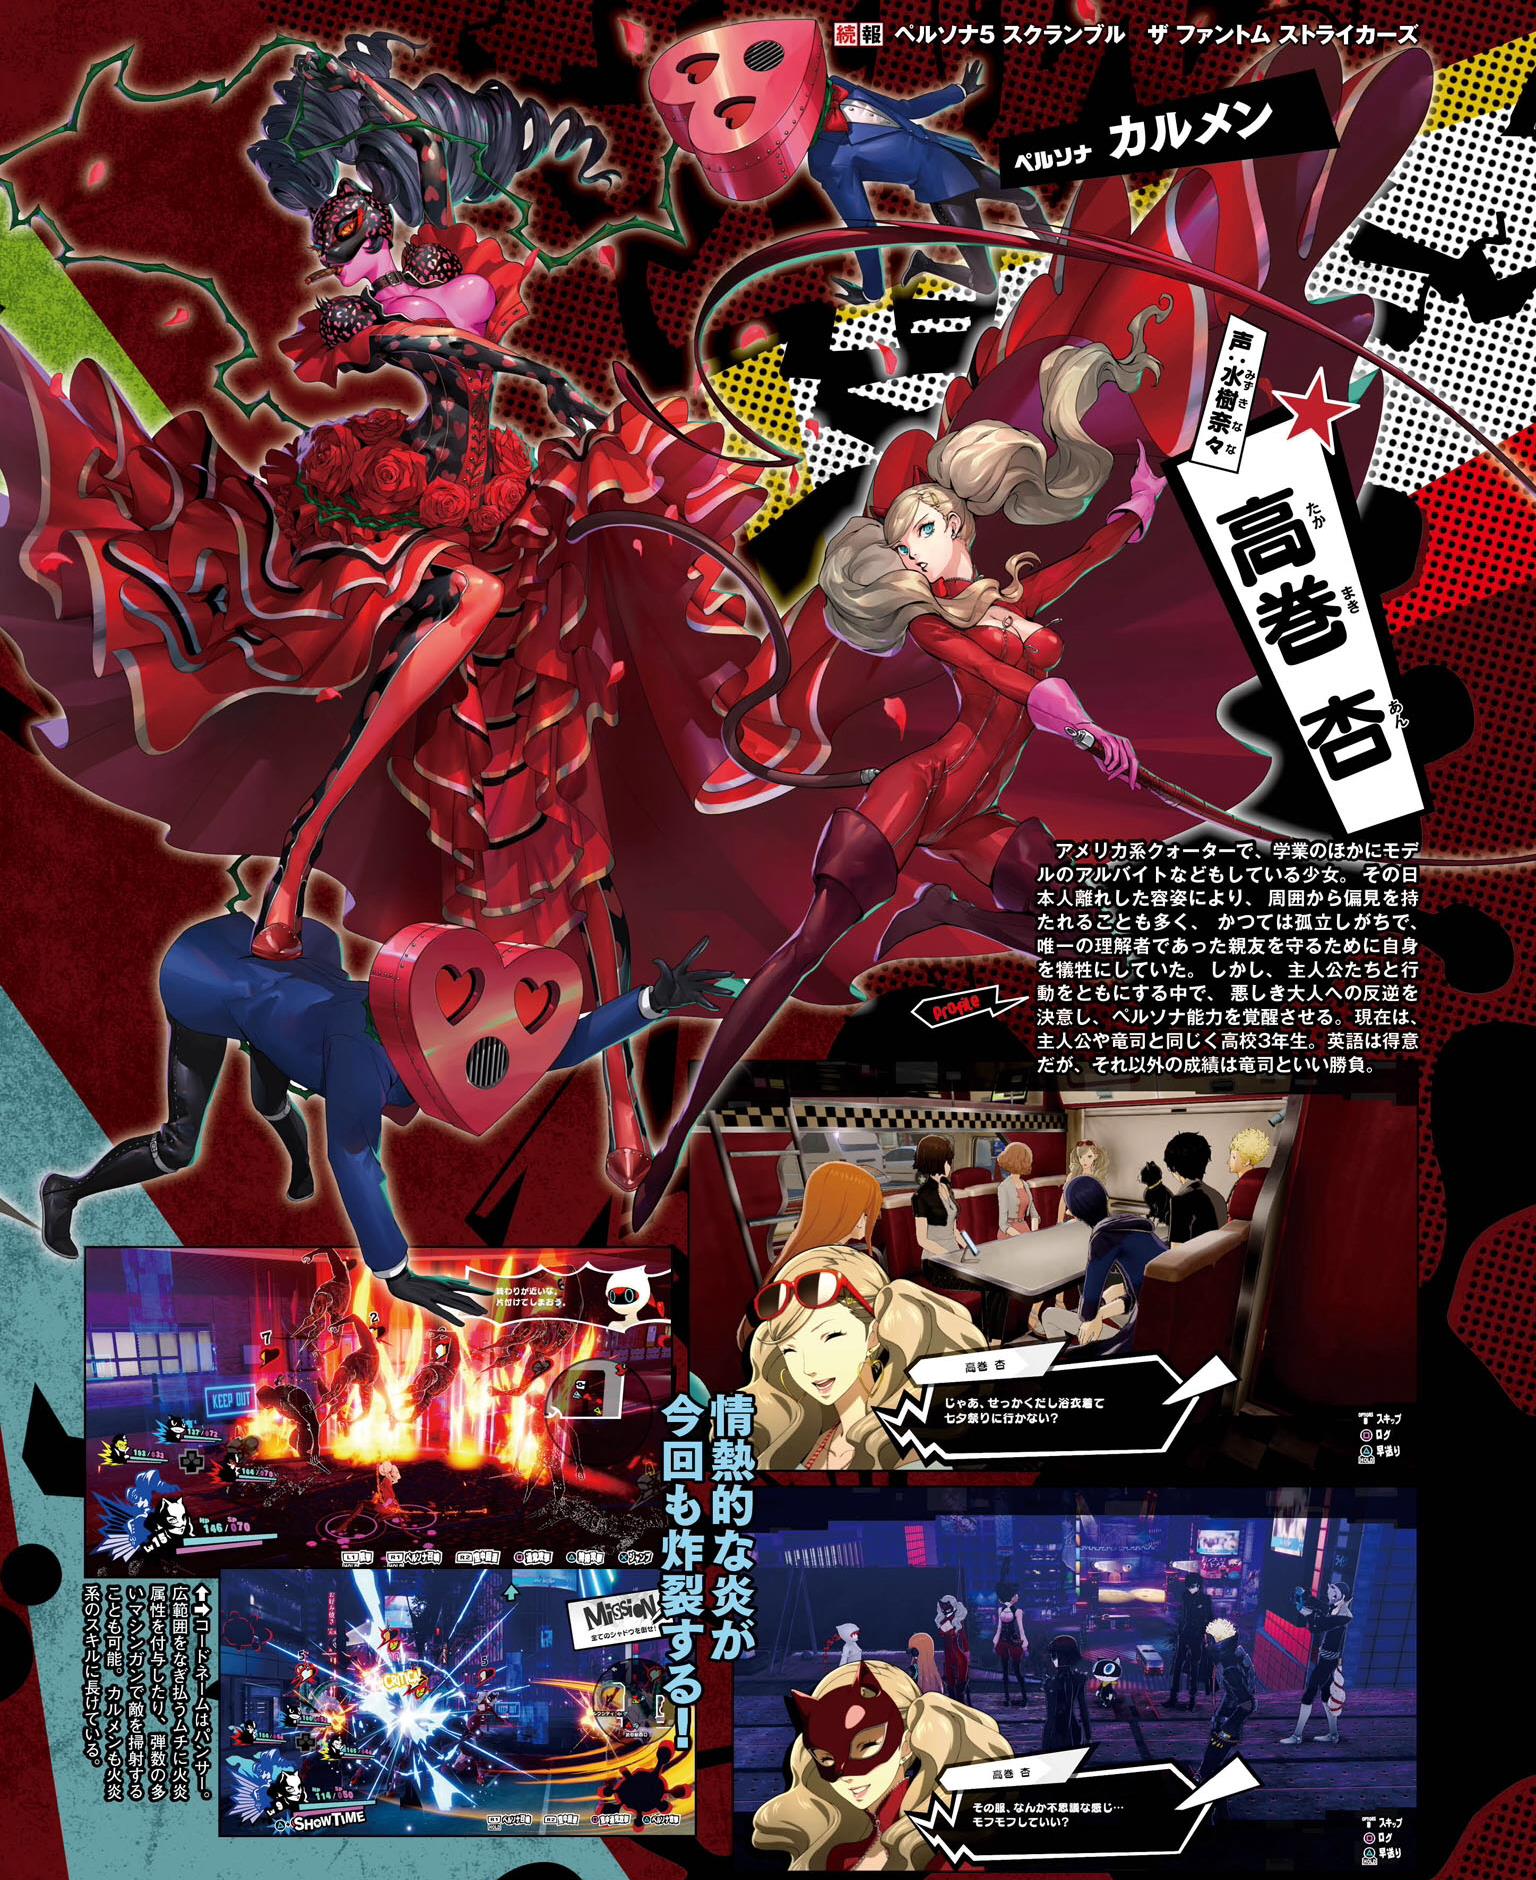 Scans roundup - Persona 5 Scramble, Monster Rancher, more